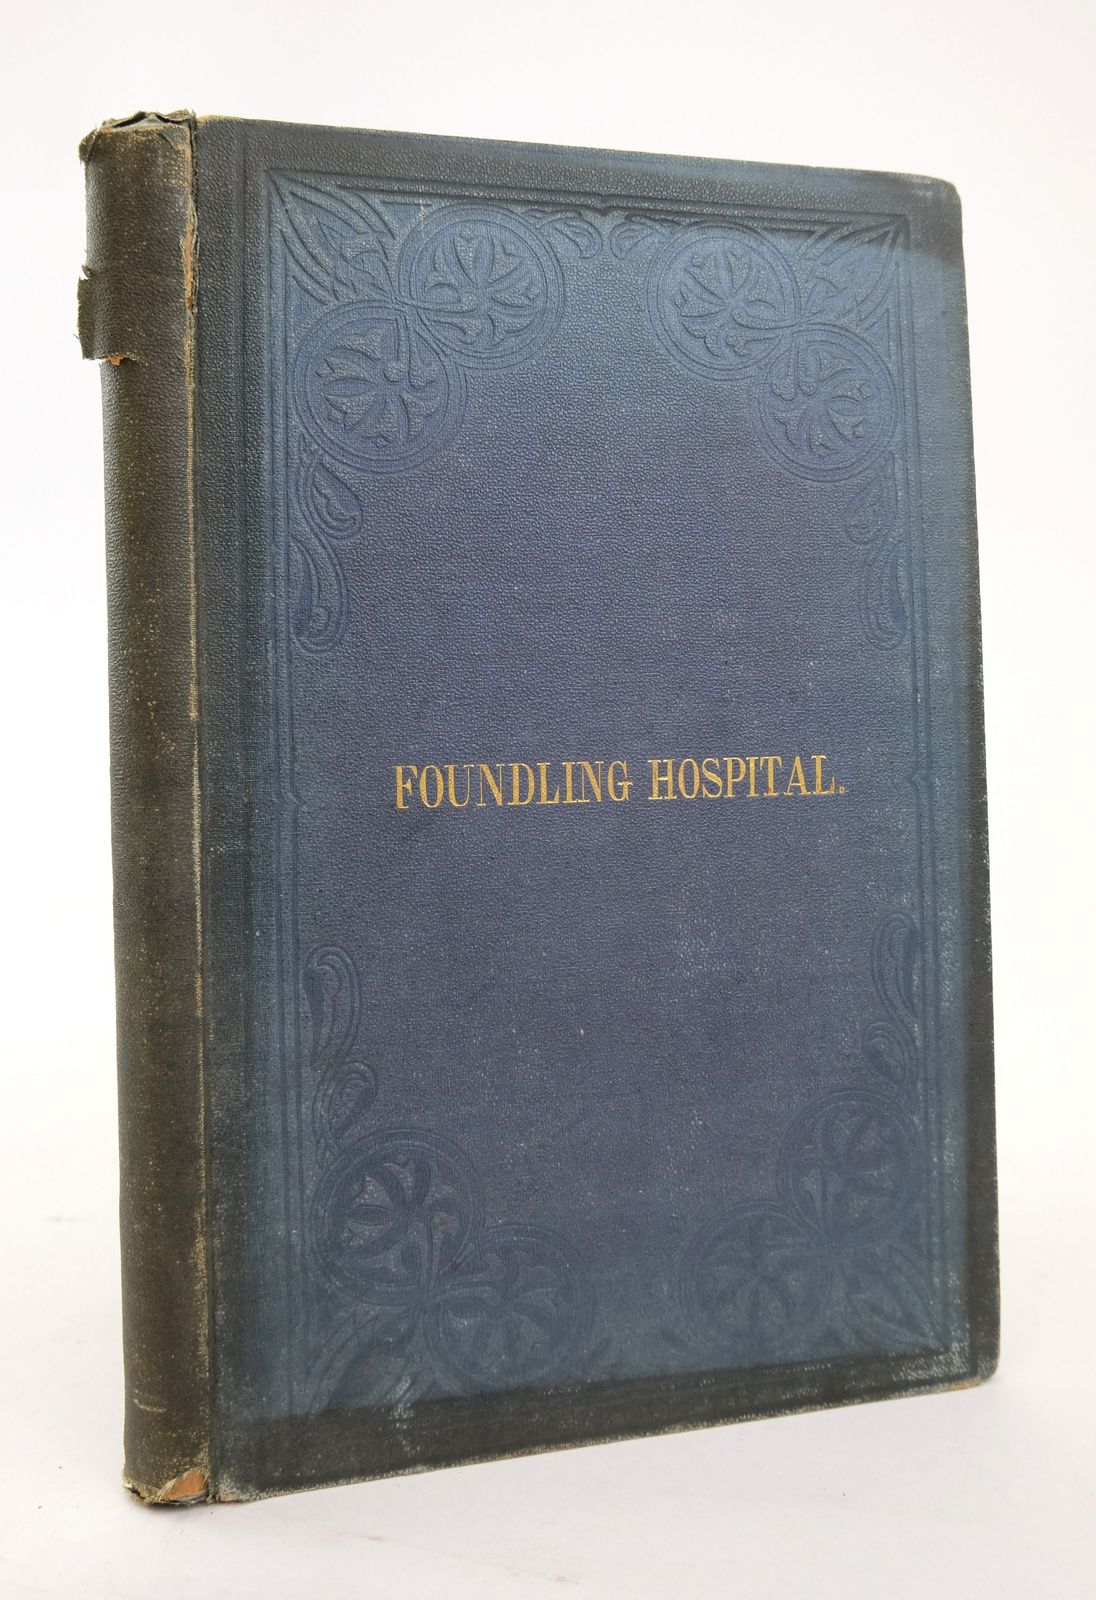 Photo of THE HISTORY AND OBJECTS OF THE FOUNDLING HOSPITAL WITH A MEMOIR OF THE FOUNDER written by Brownlow, John published by C. Jaques (STOCK CODE: 1820909)  for sale by Stella & Rose's Books